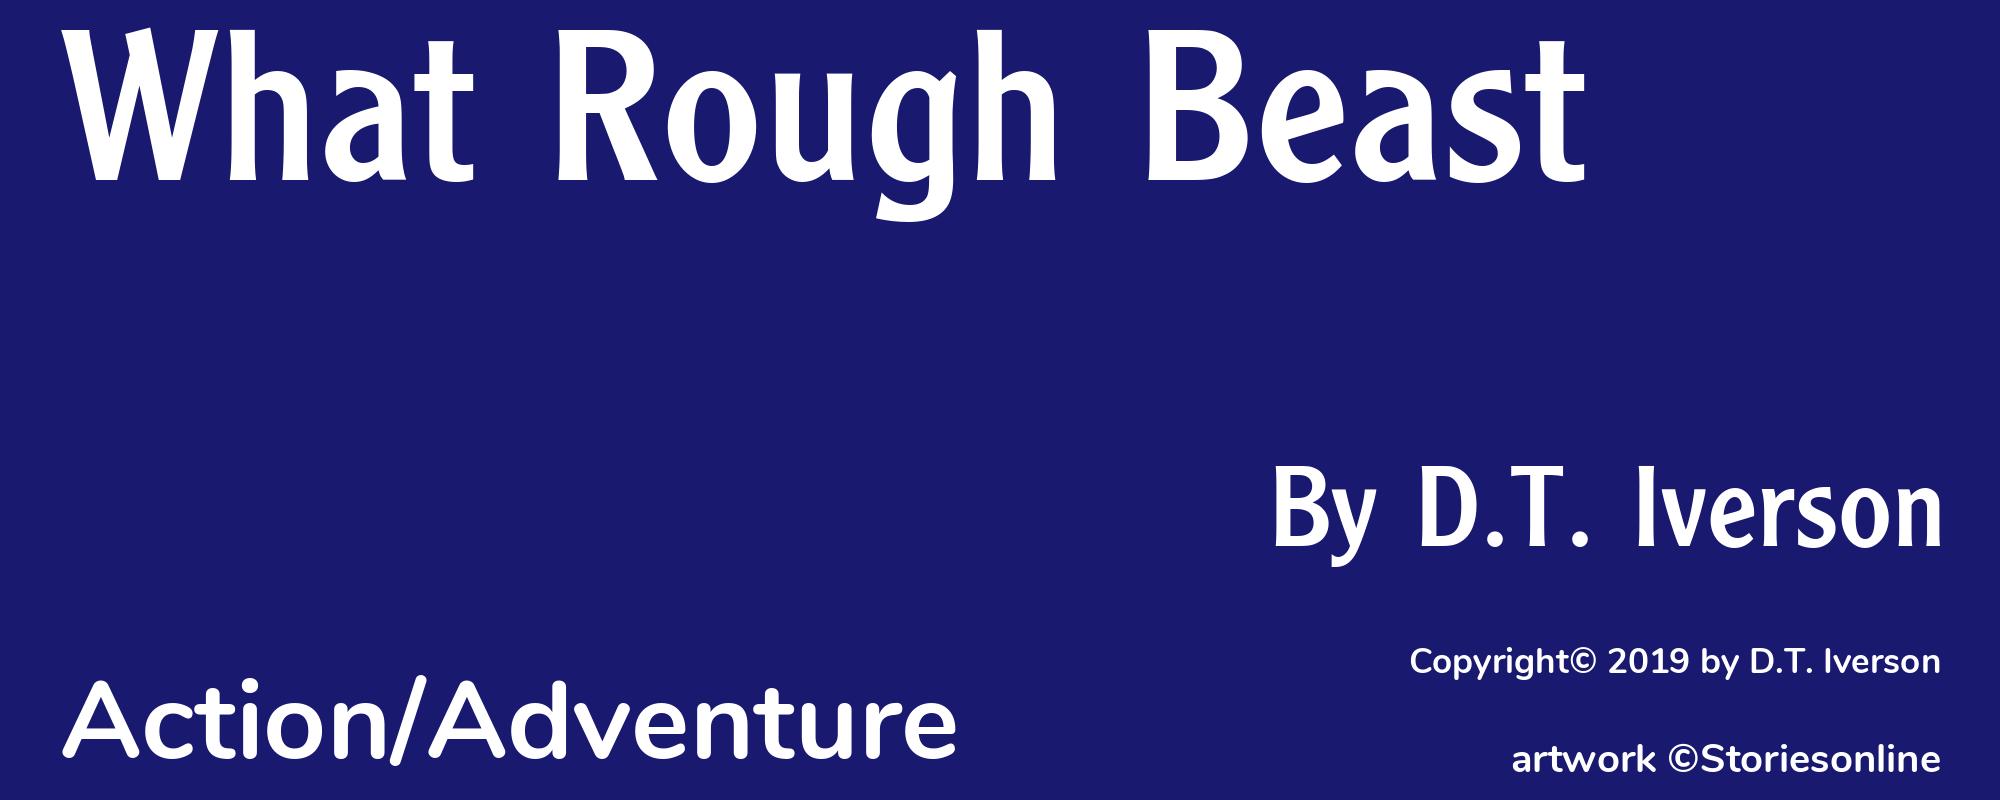 What Rough Beast - Cover